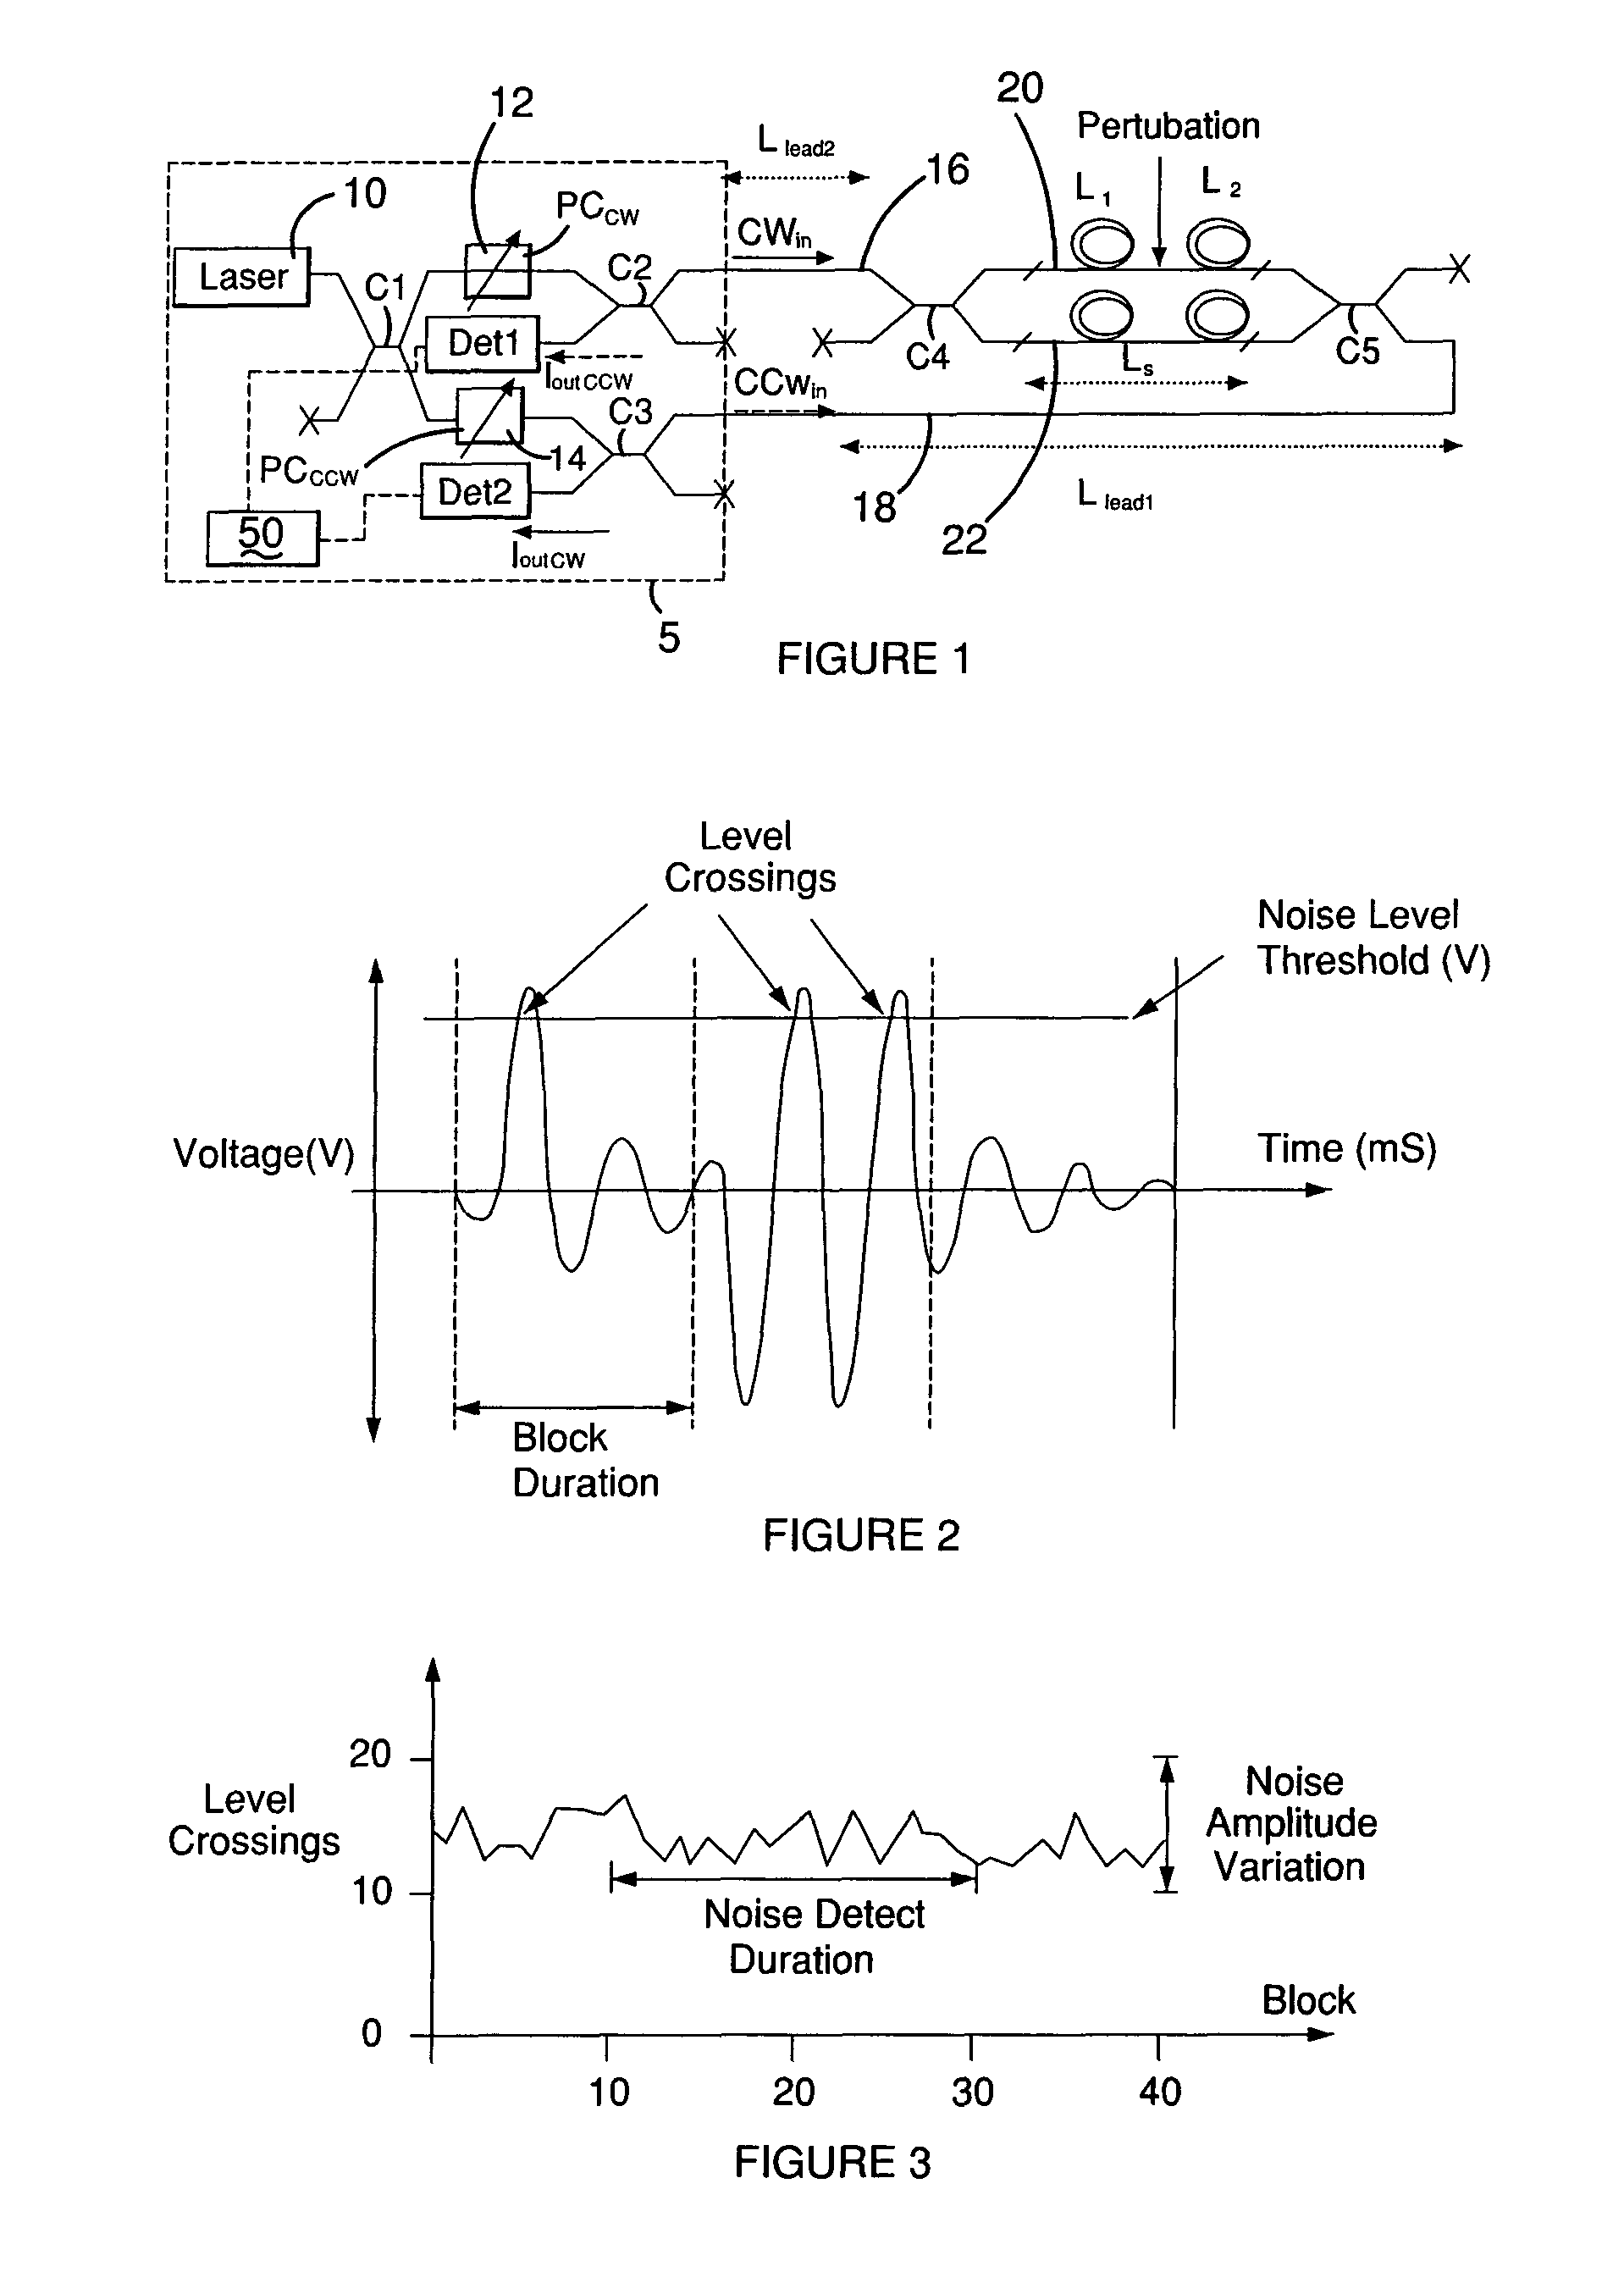 Method and apparatus for monitoring a structure